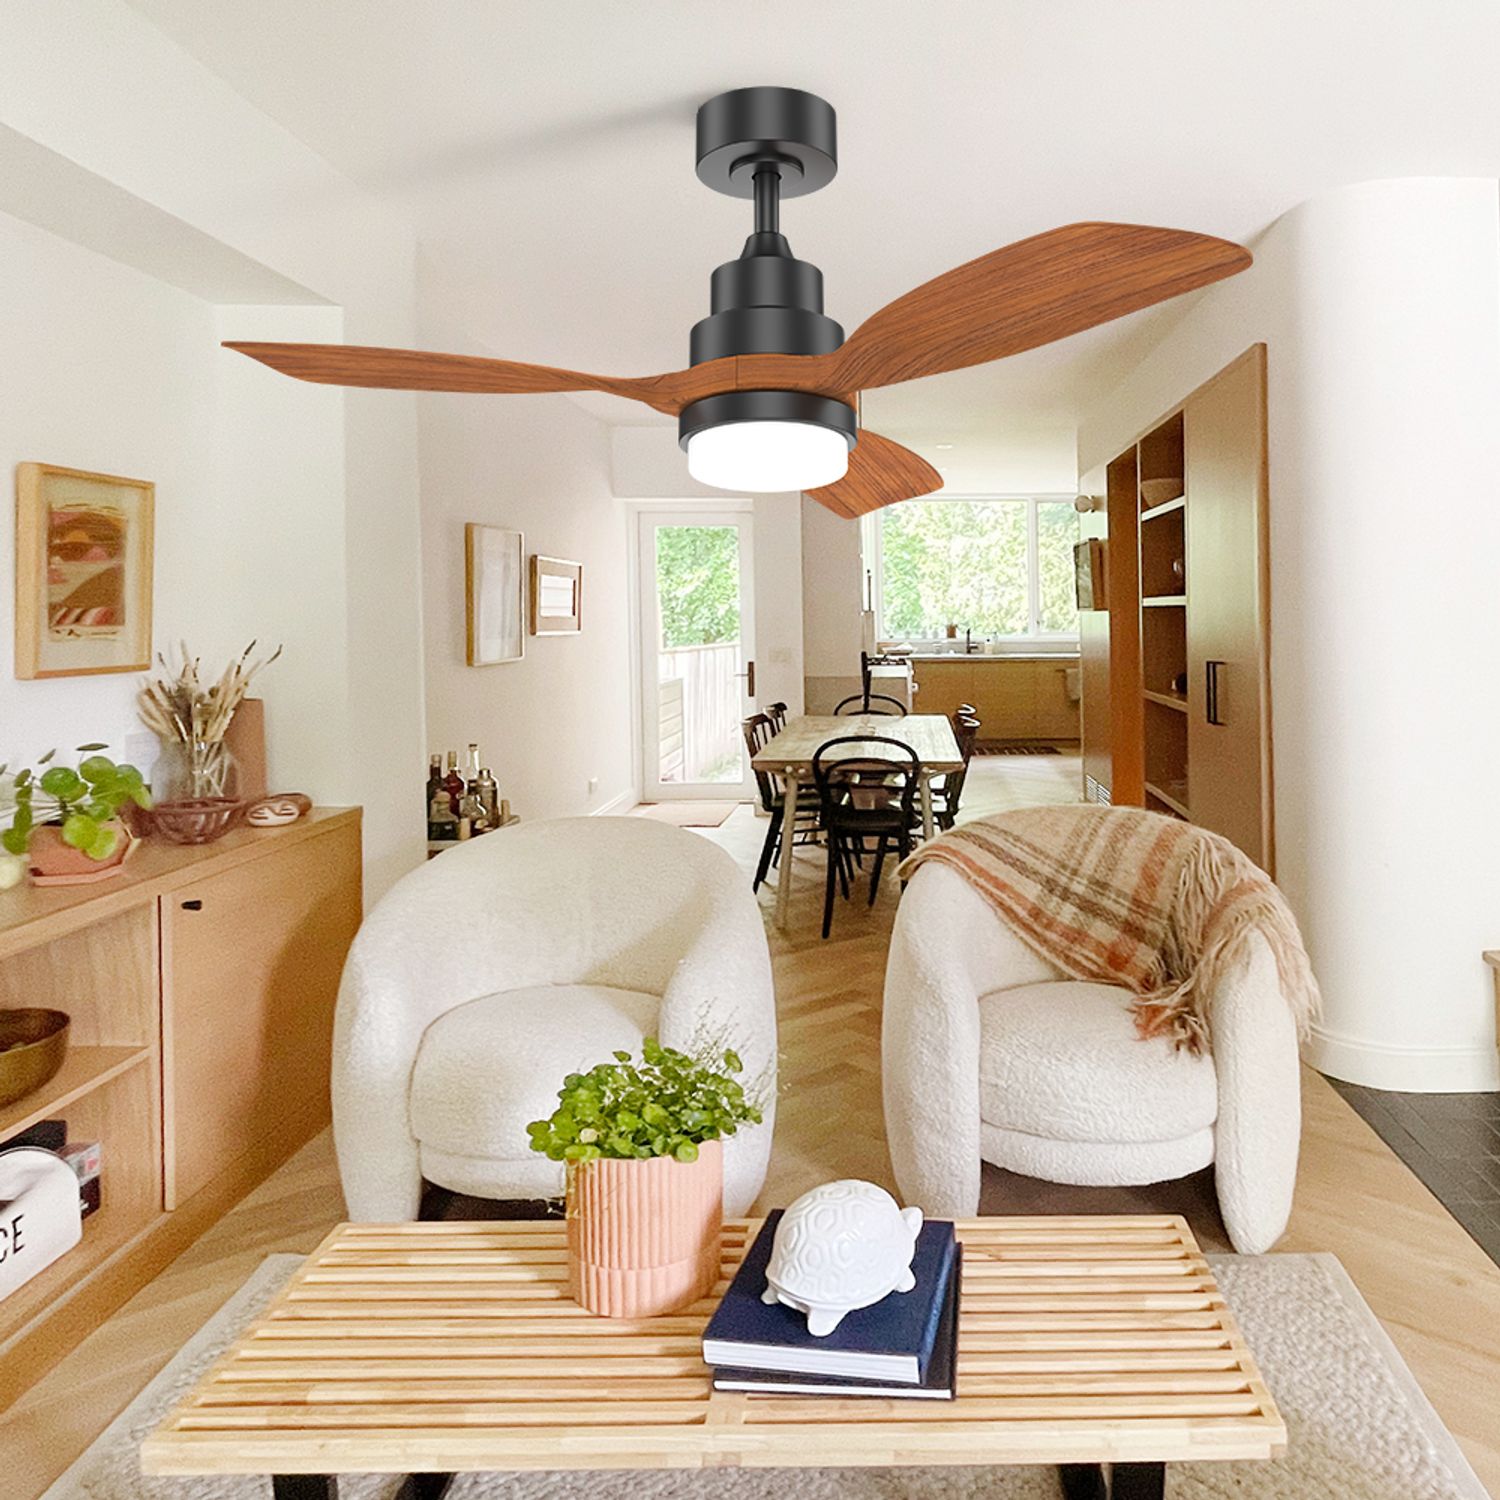 KBS 42" Natural Wood Ceiling Fan with Light in a small room